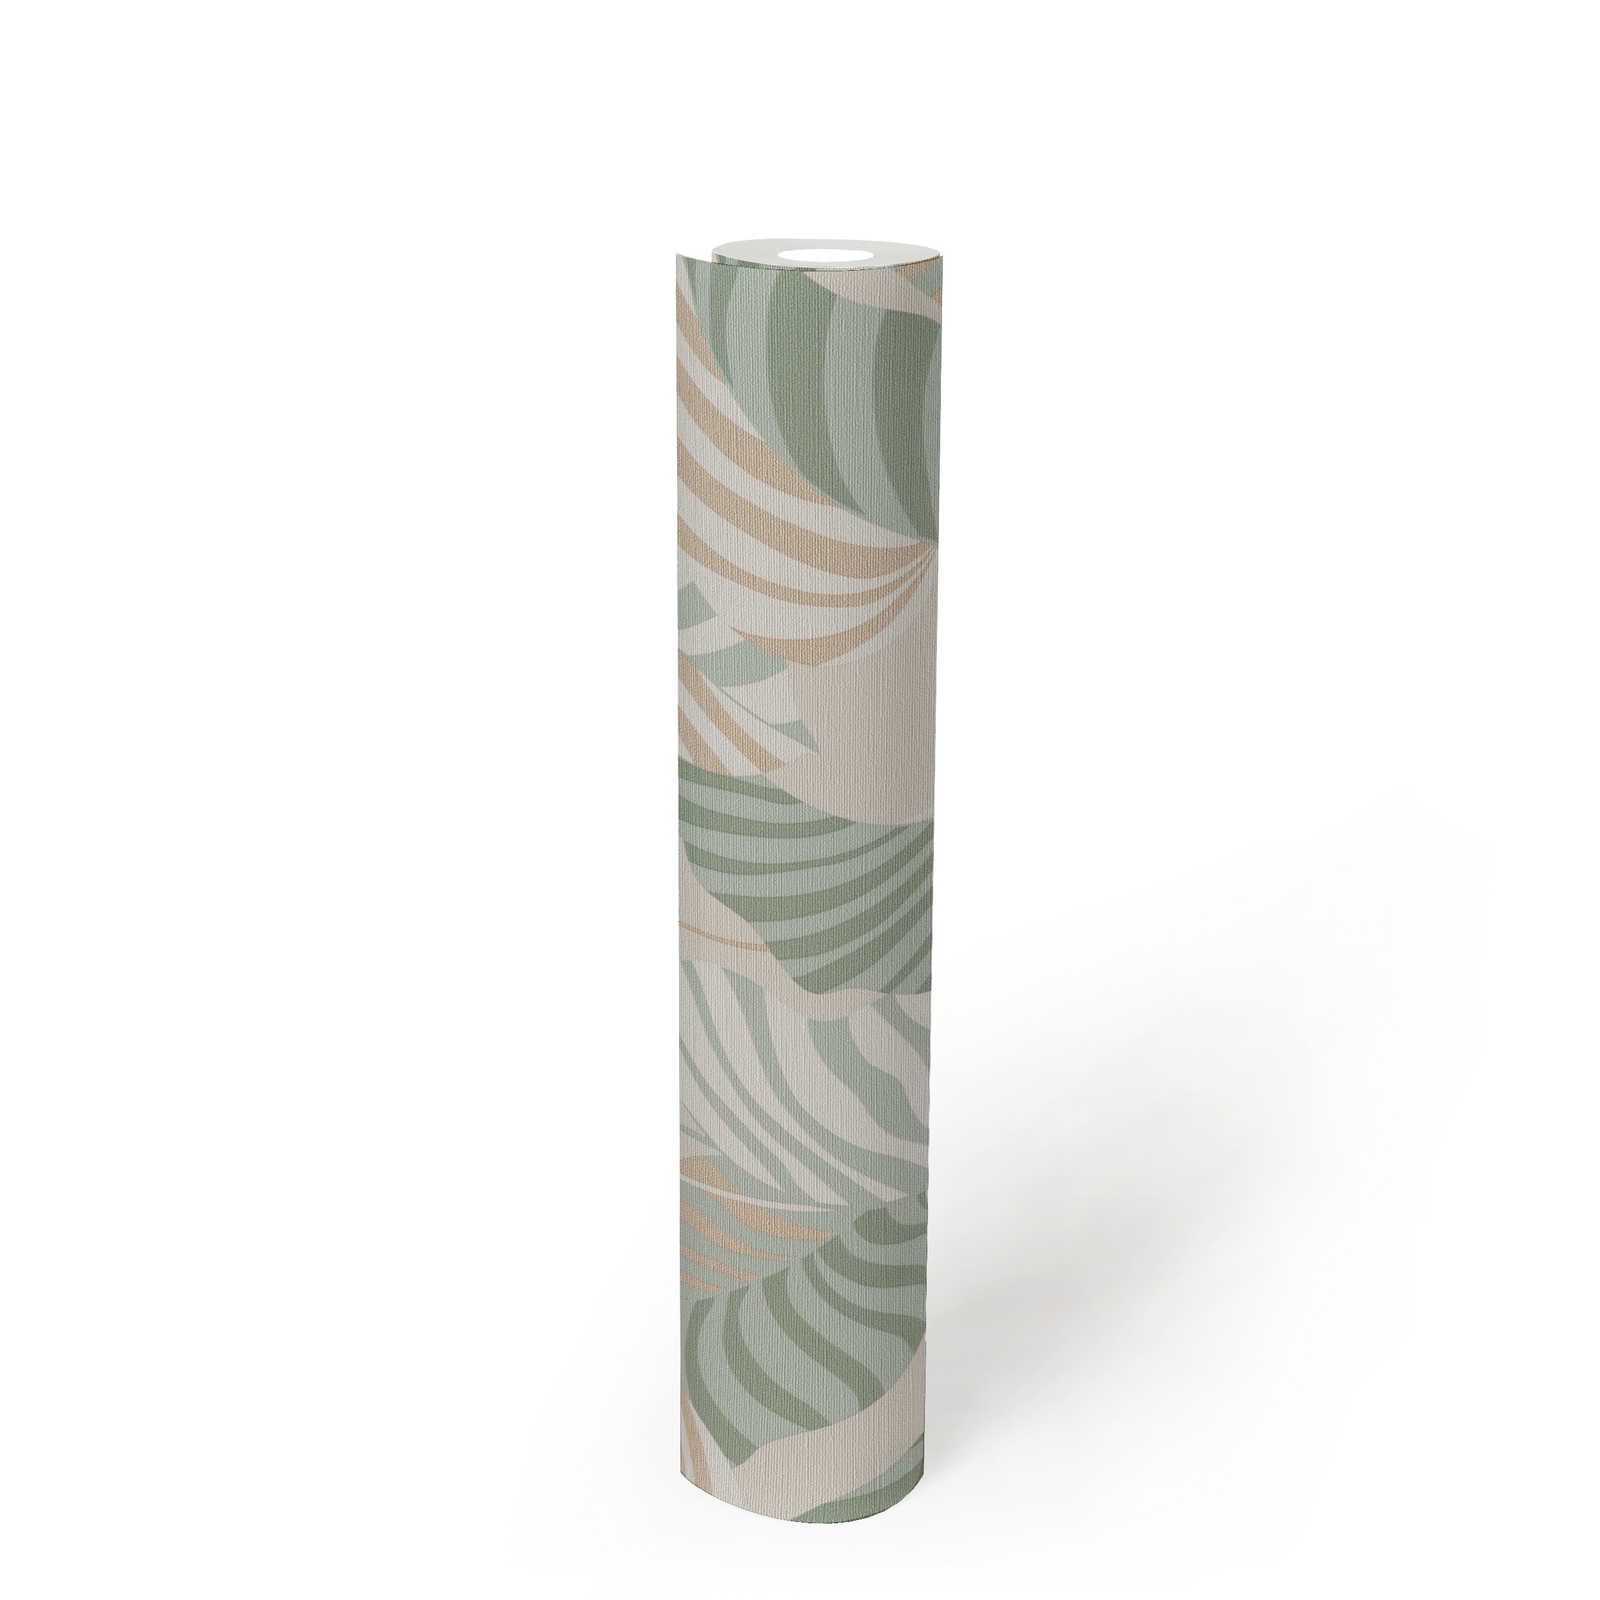             Non-woven wallpaper in natural style with slightly shiny palm leaves - cream, green, gold
        